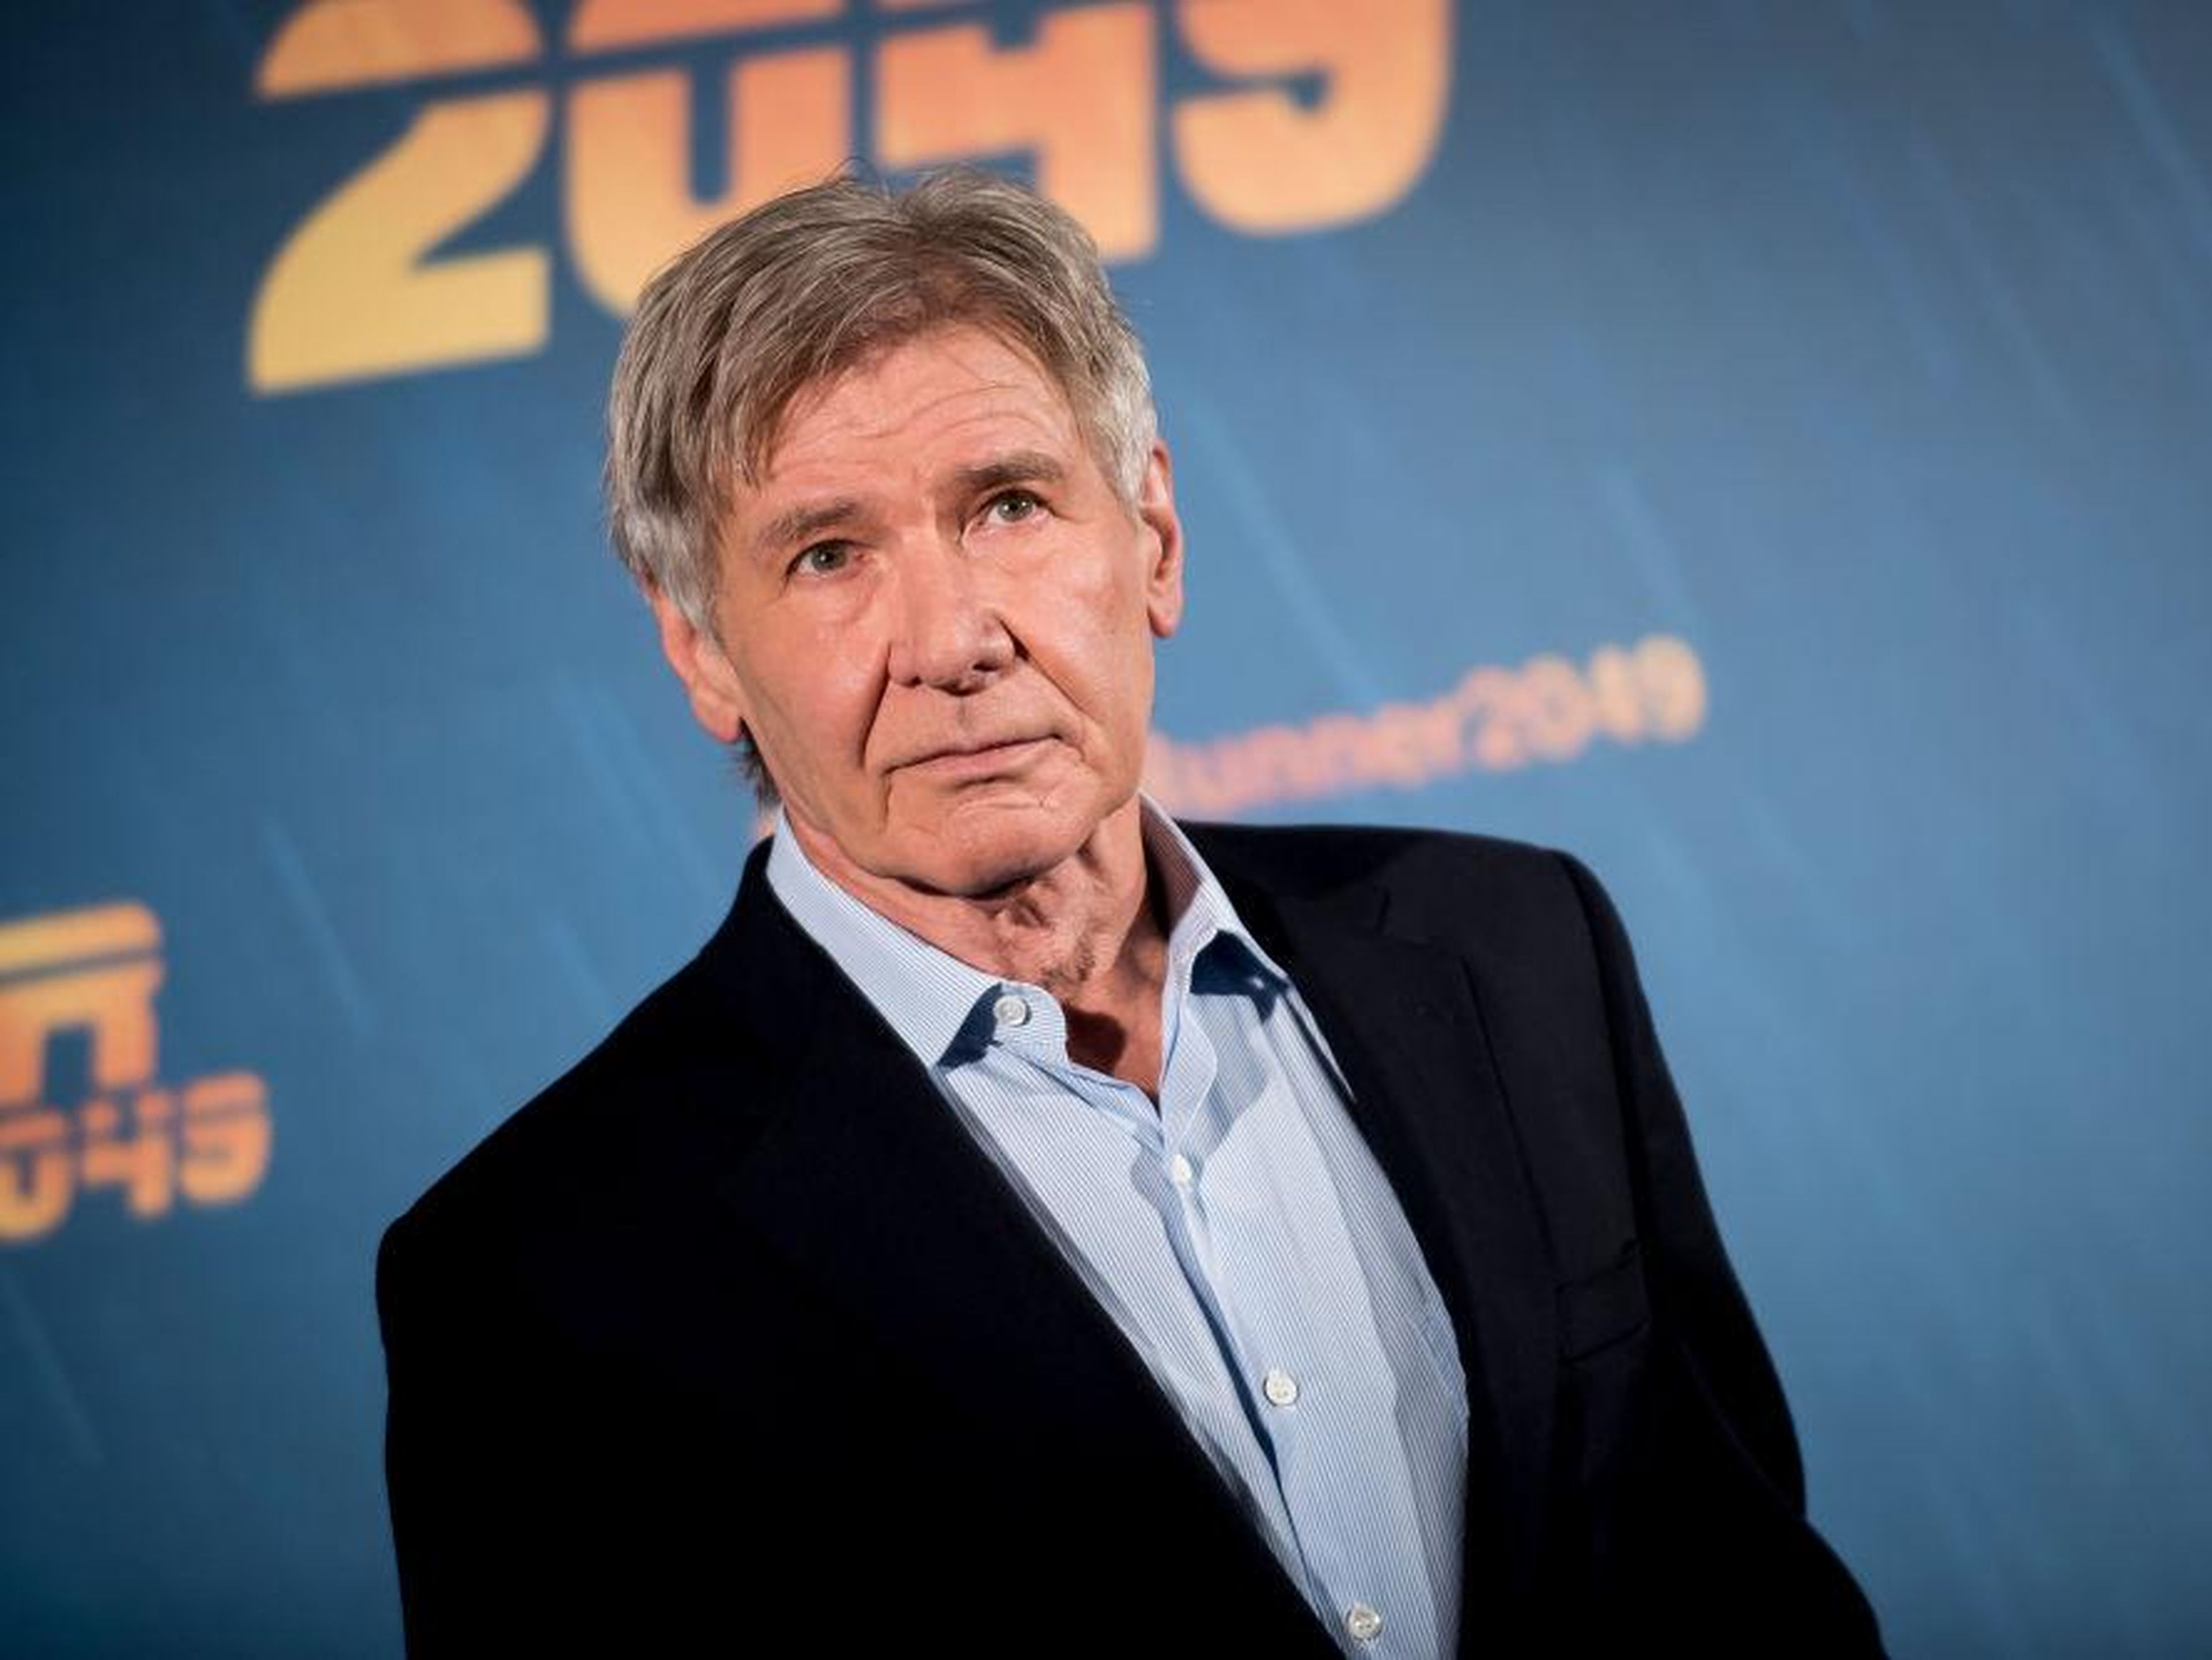 Harrison Ford will star.